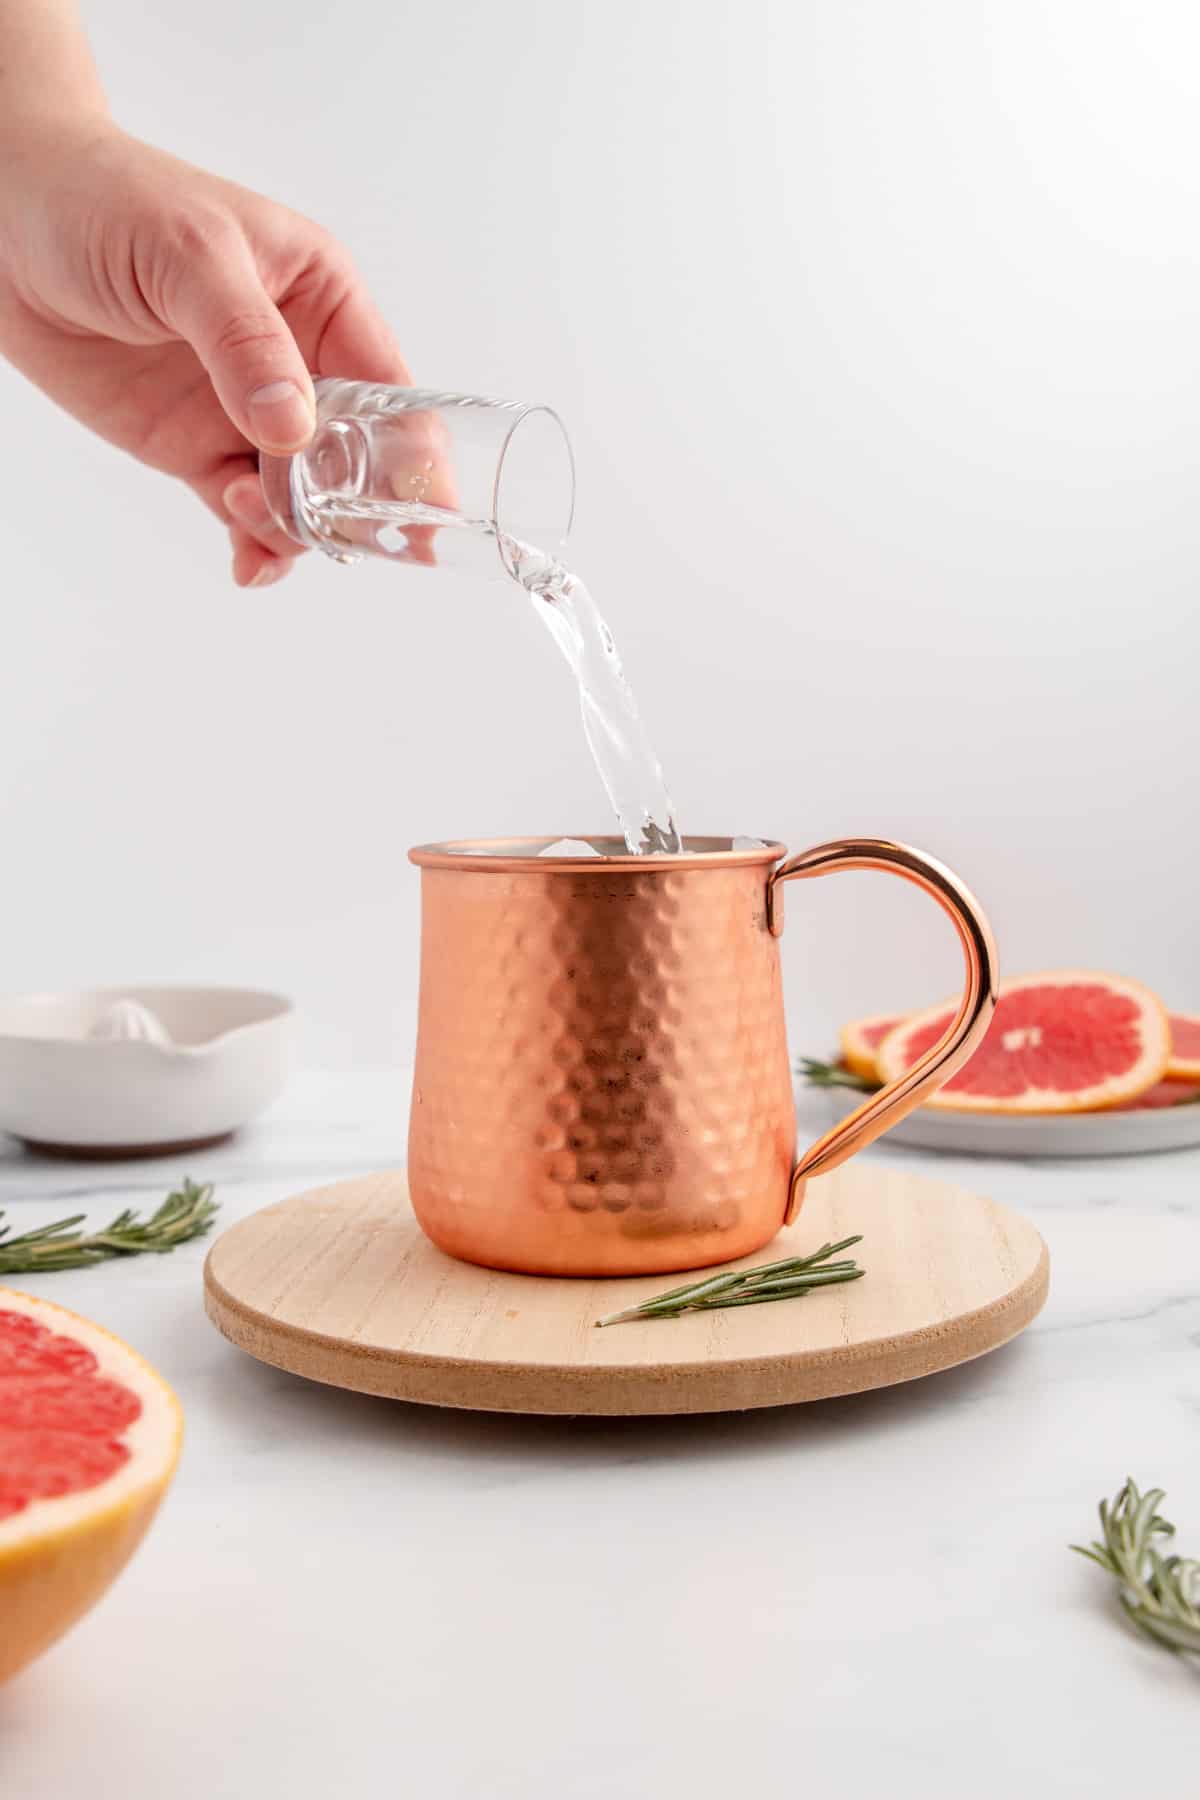 Pouring vodka into a copper mug to make a Moscow Mule.